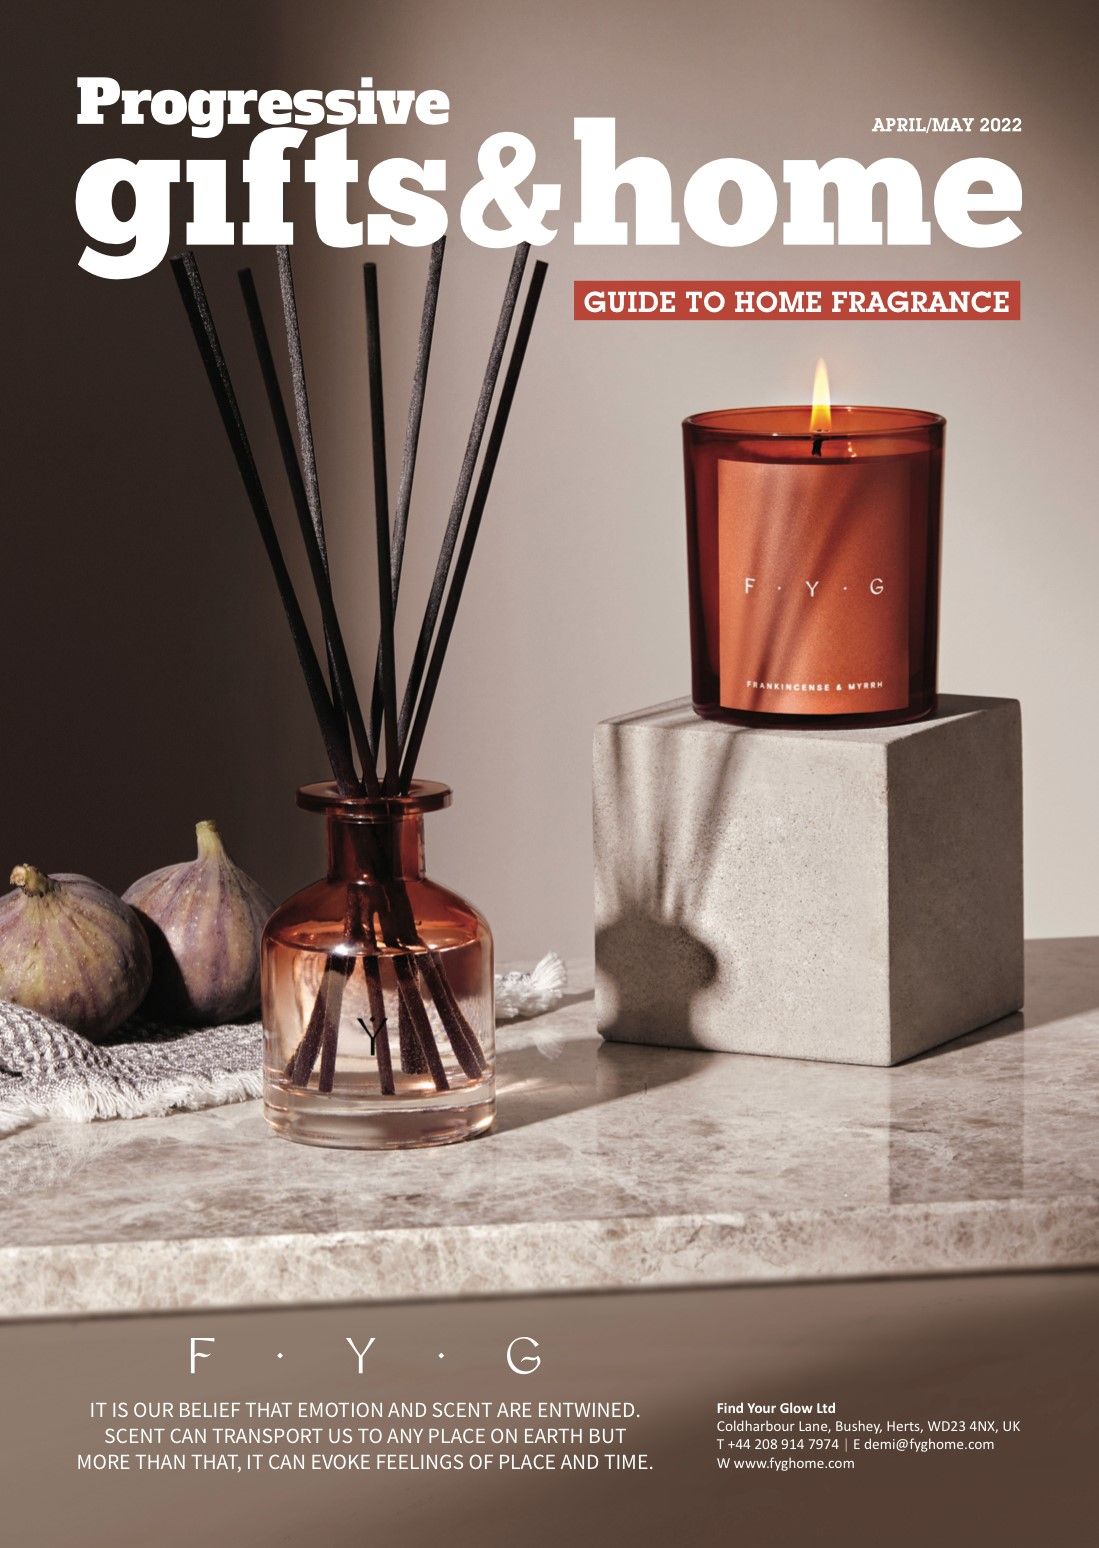 PROGRESSIVE GIFTS & HOME FRONT COVER